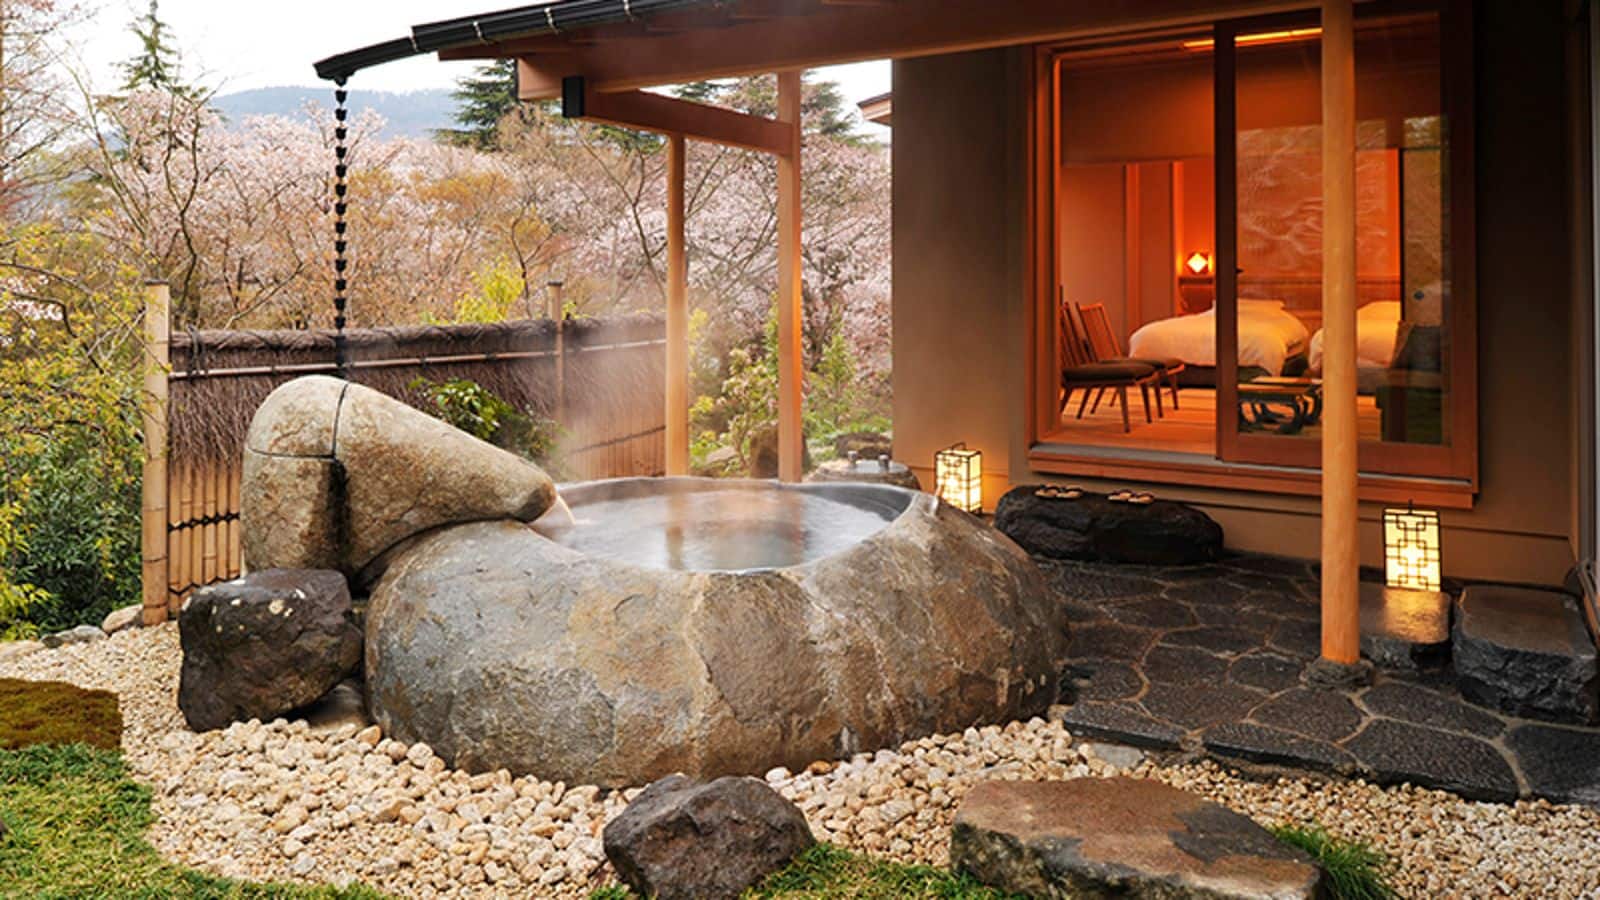 Tokyo's tranquil hot springs and gardens you need to explore